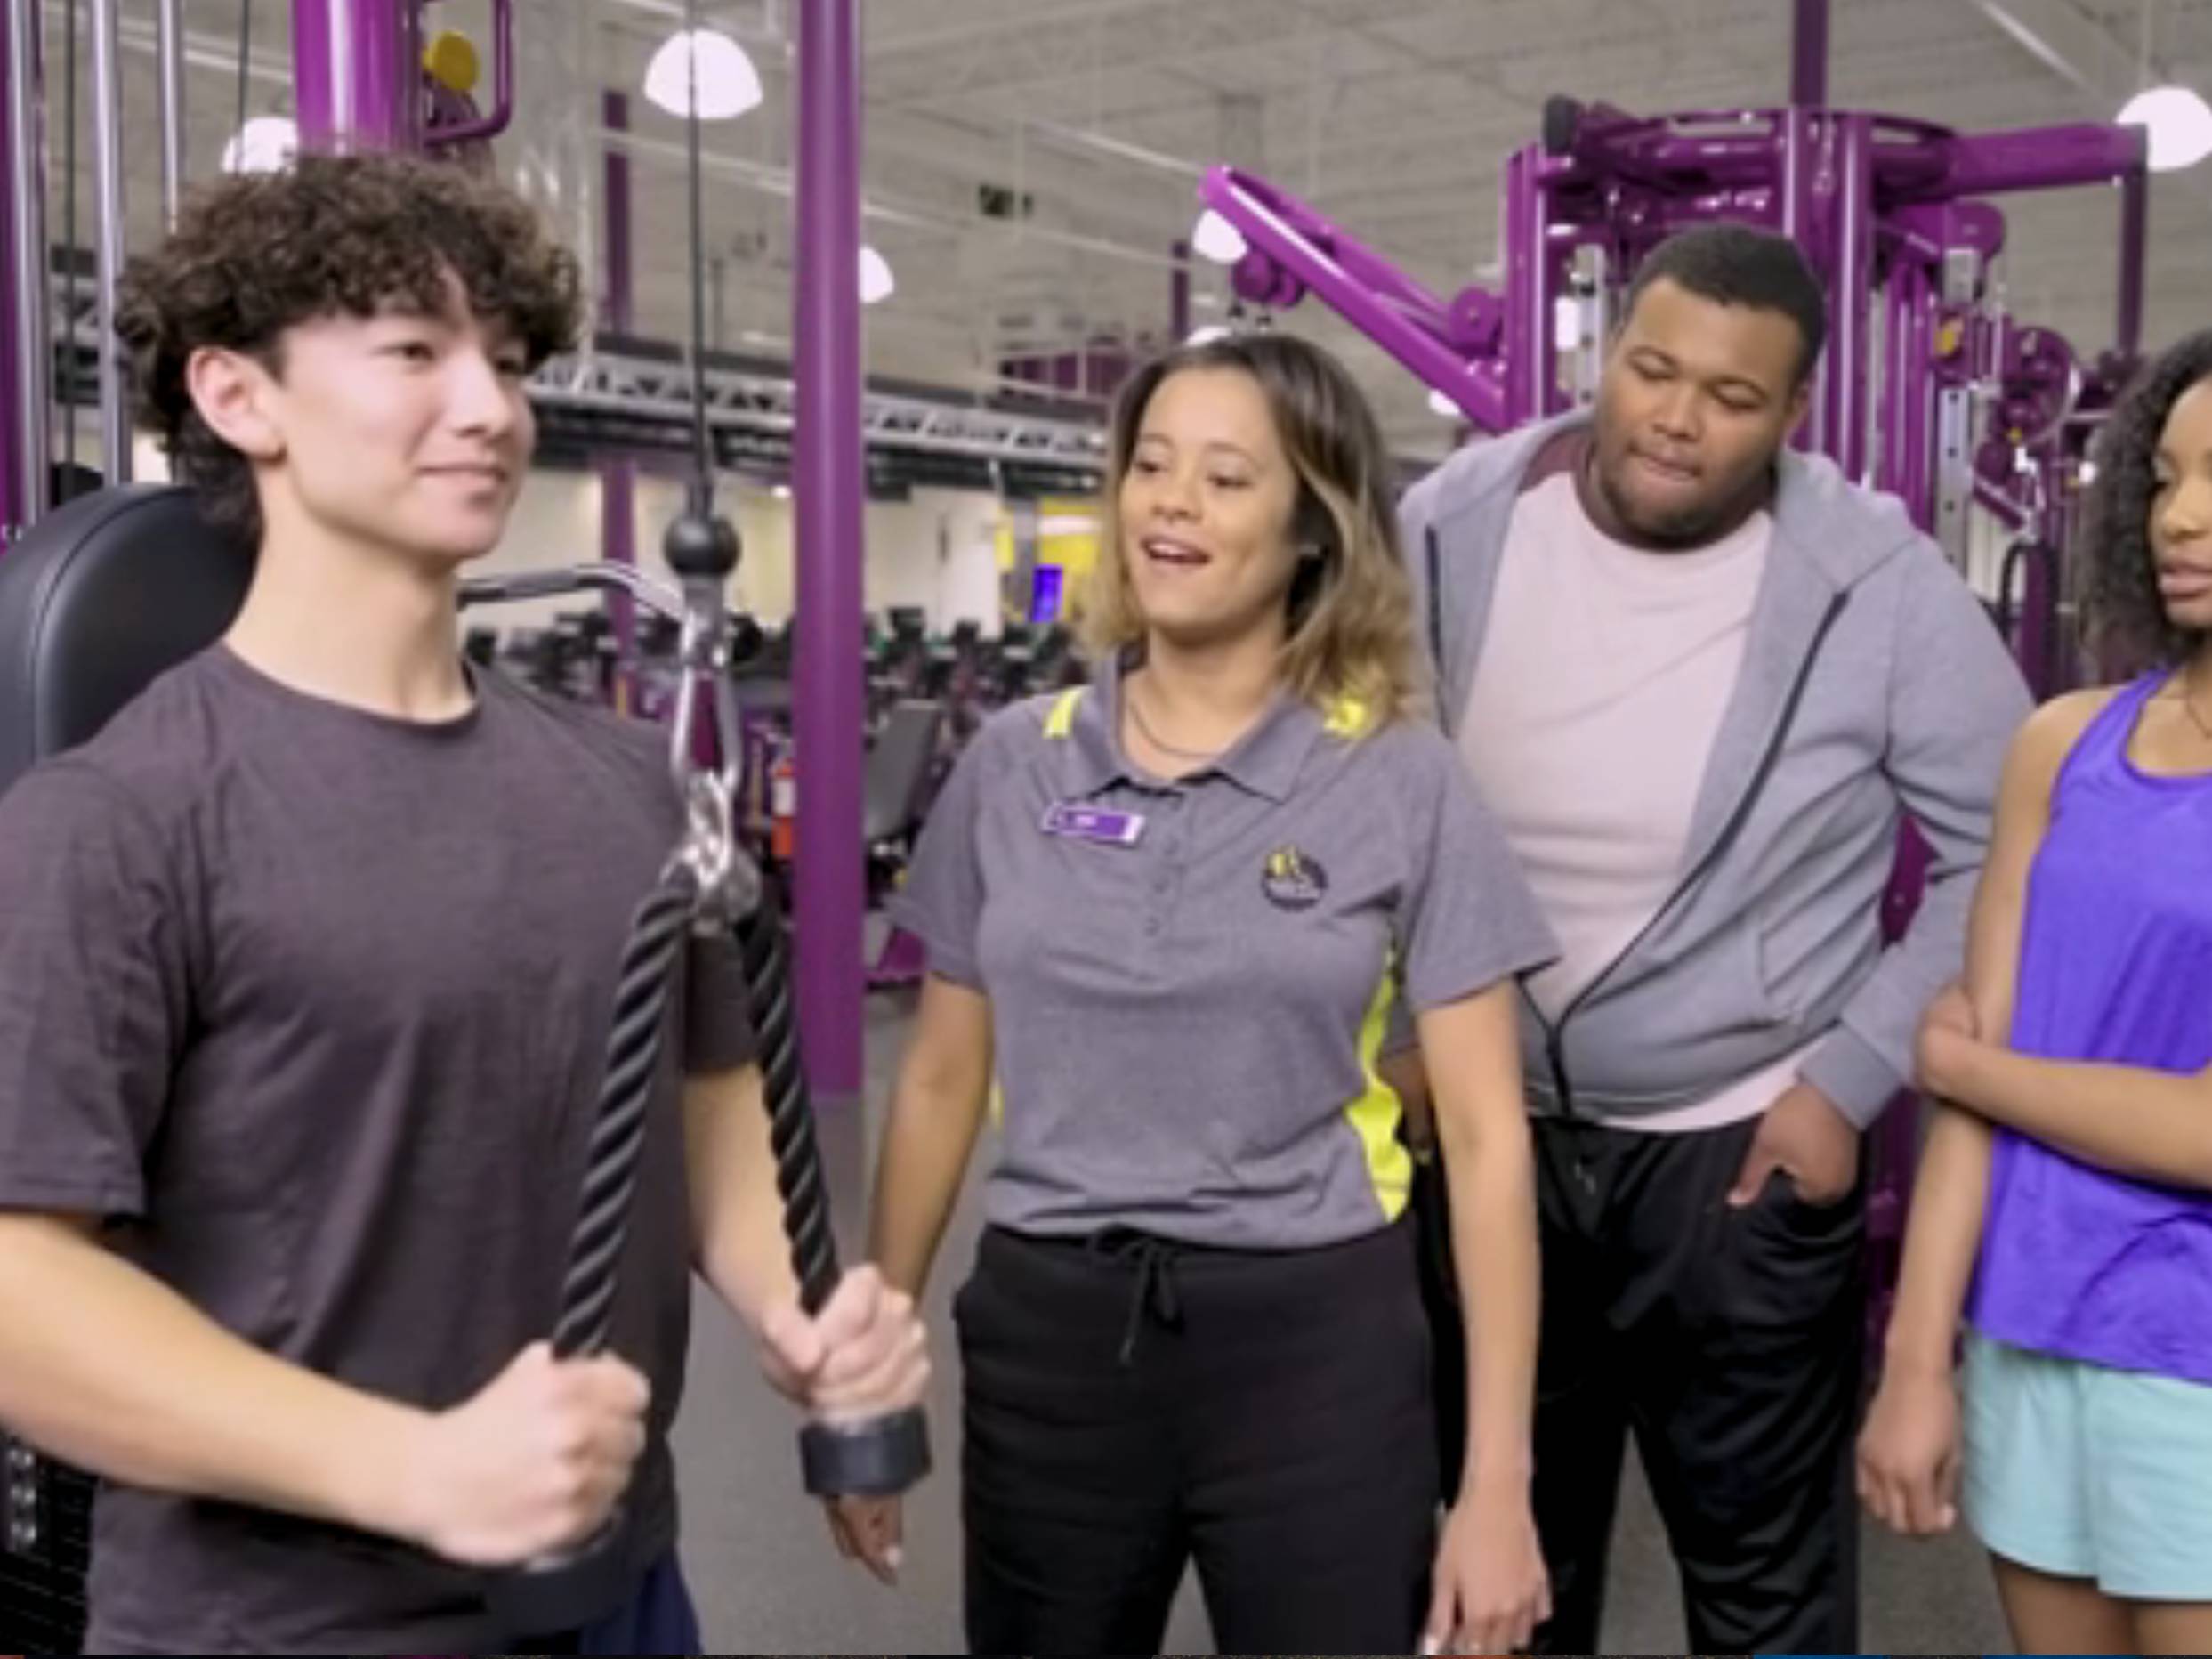 Planet Fitness, one of the largest and fastest-growing franchisors and operators of fitness centers with more members than any other fitness brand, announces the return of its High School Summer Pass program, inviting high schoolers ages 14 - 19* to work out for free at any of its more than 2,400 Planet Fitness locations throughout the United States and Canada from May 15 through August 31.